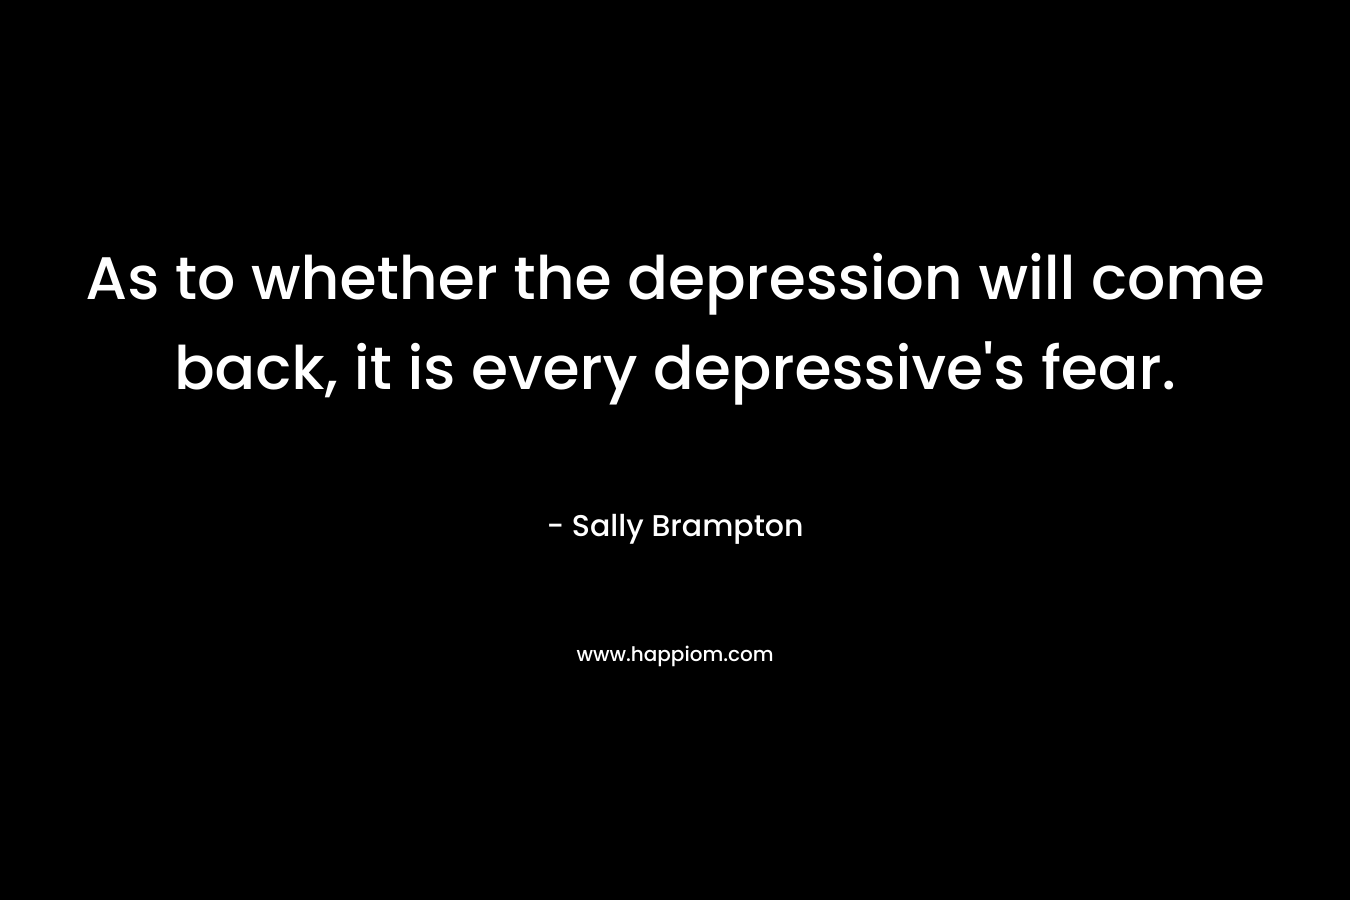 As to whether the depression will come back, it is every depressive's fear.